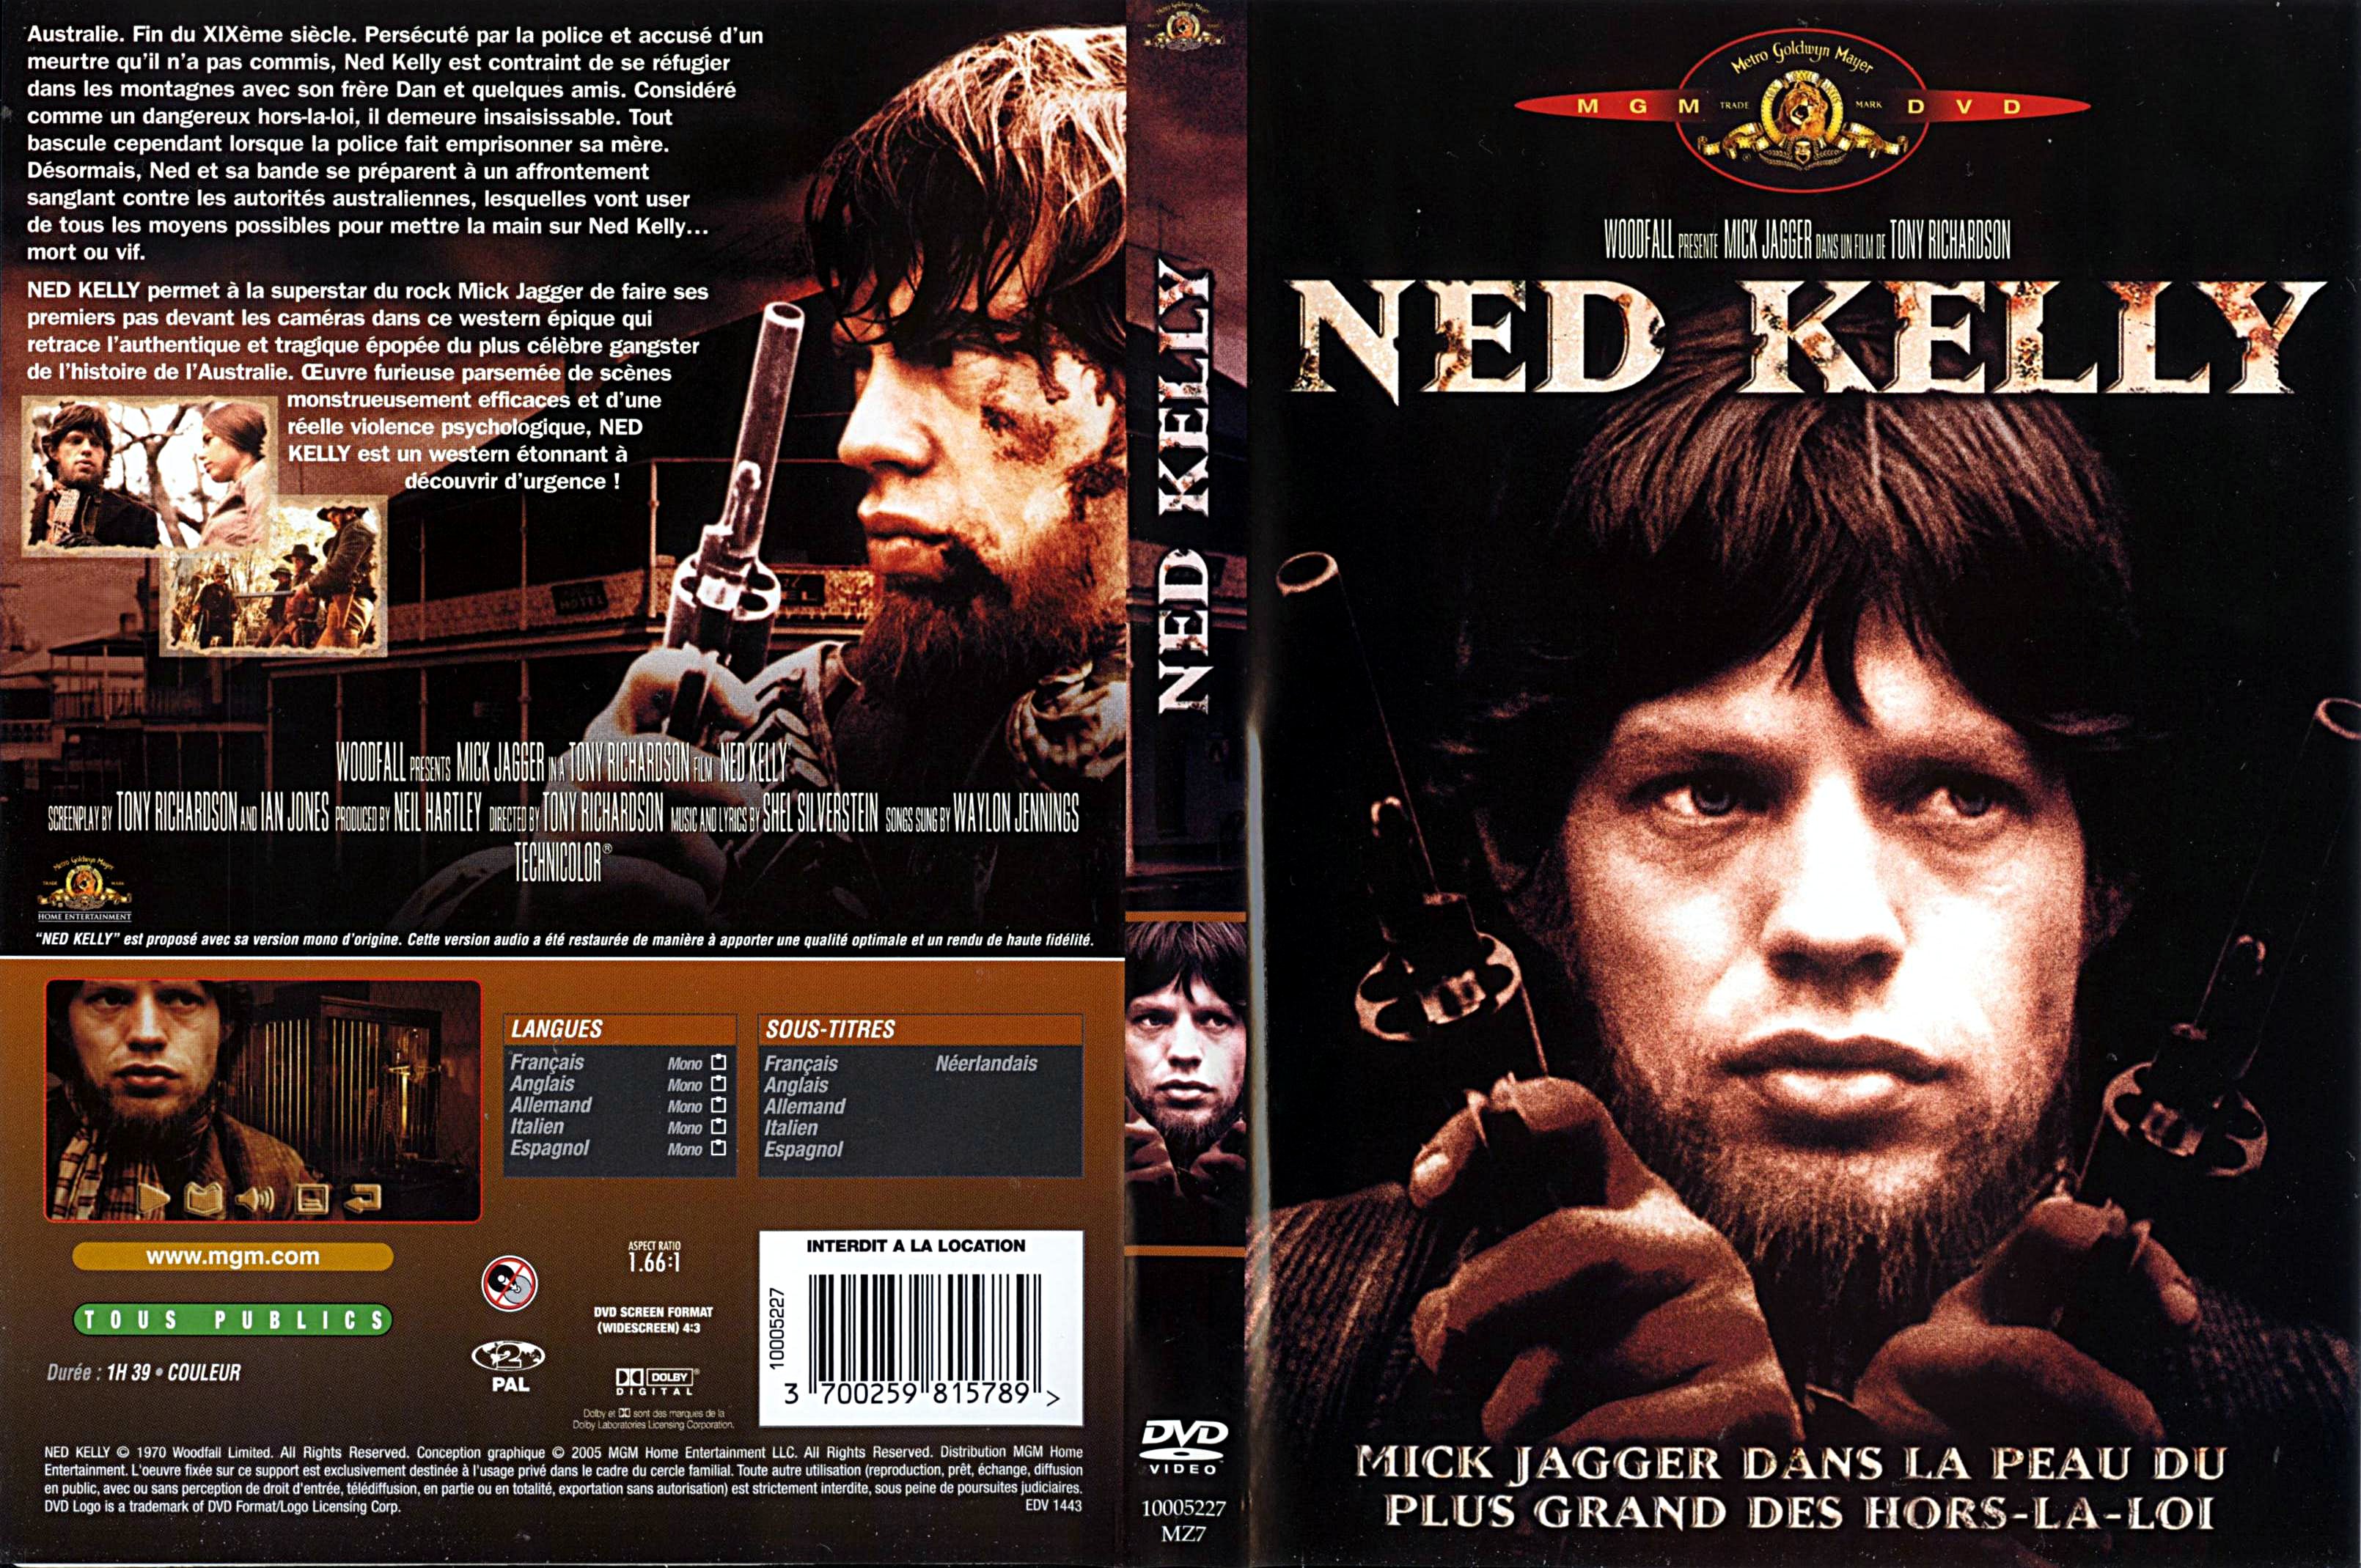 Jaquette DVD Ned Kelly (1970)